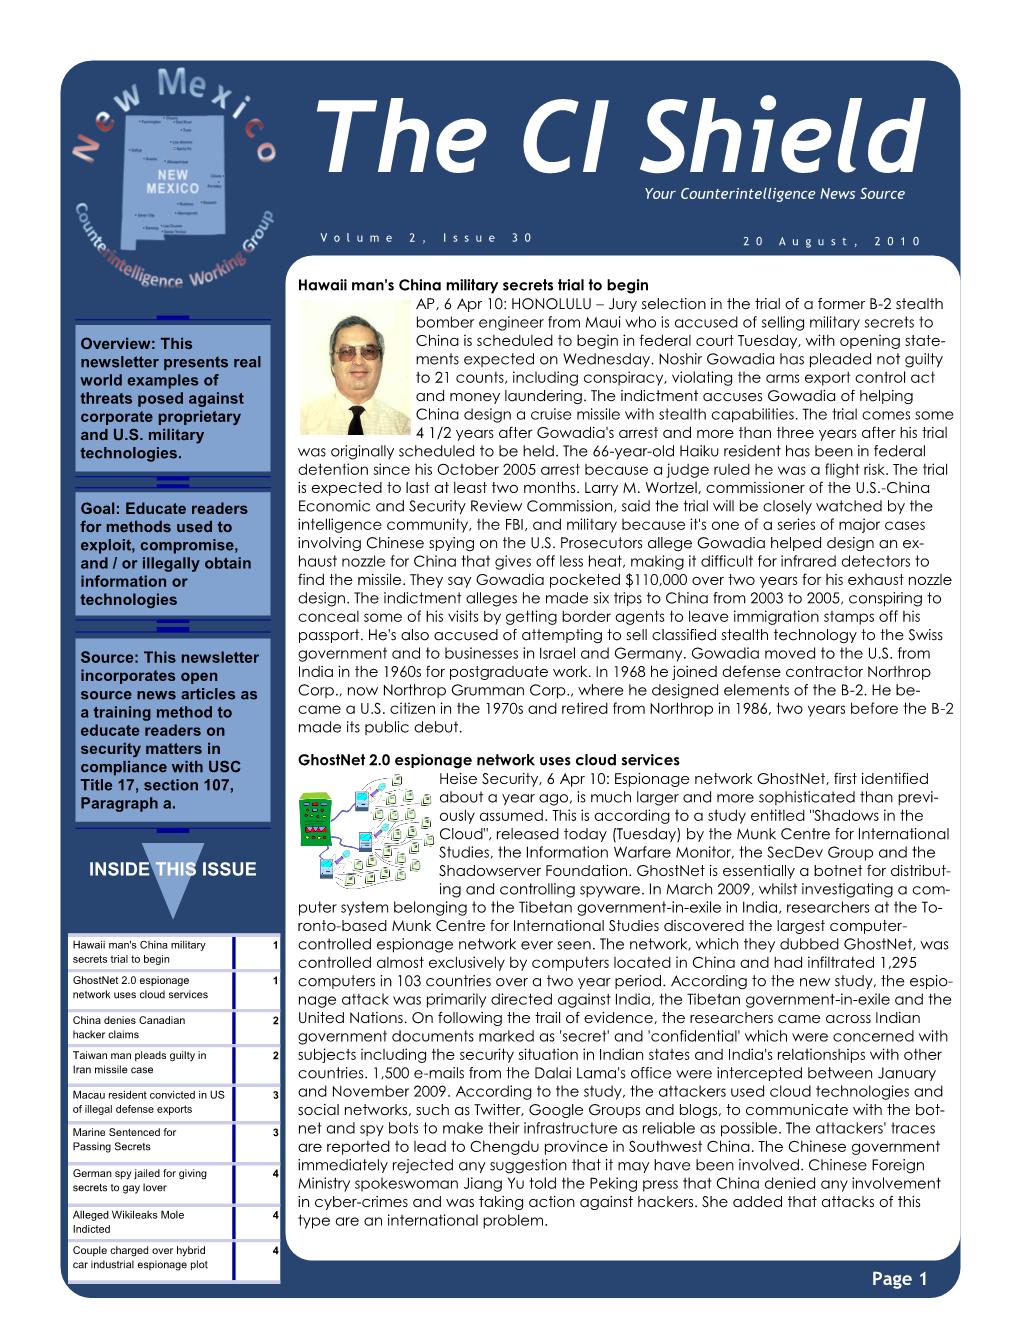 The CI Shield Your Counterintelligence News Source